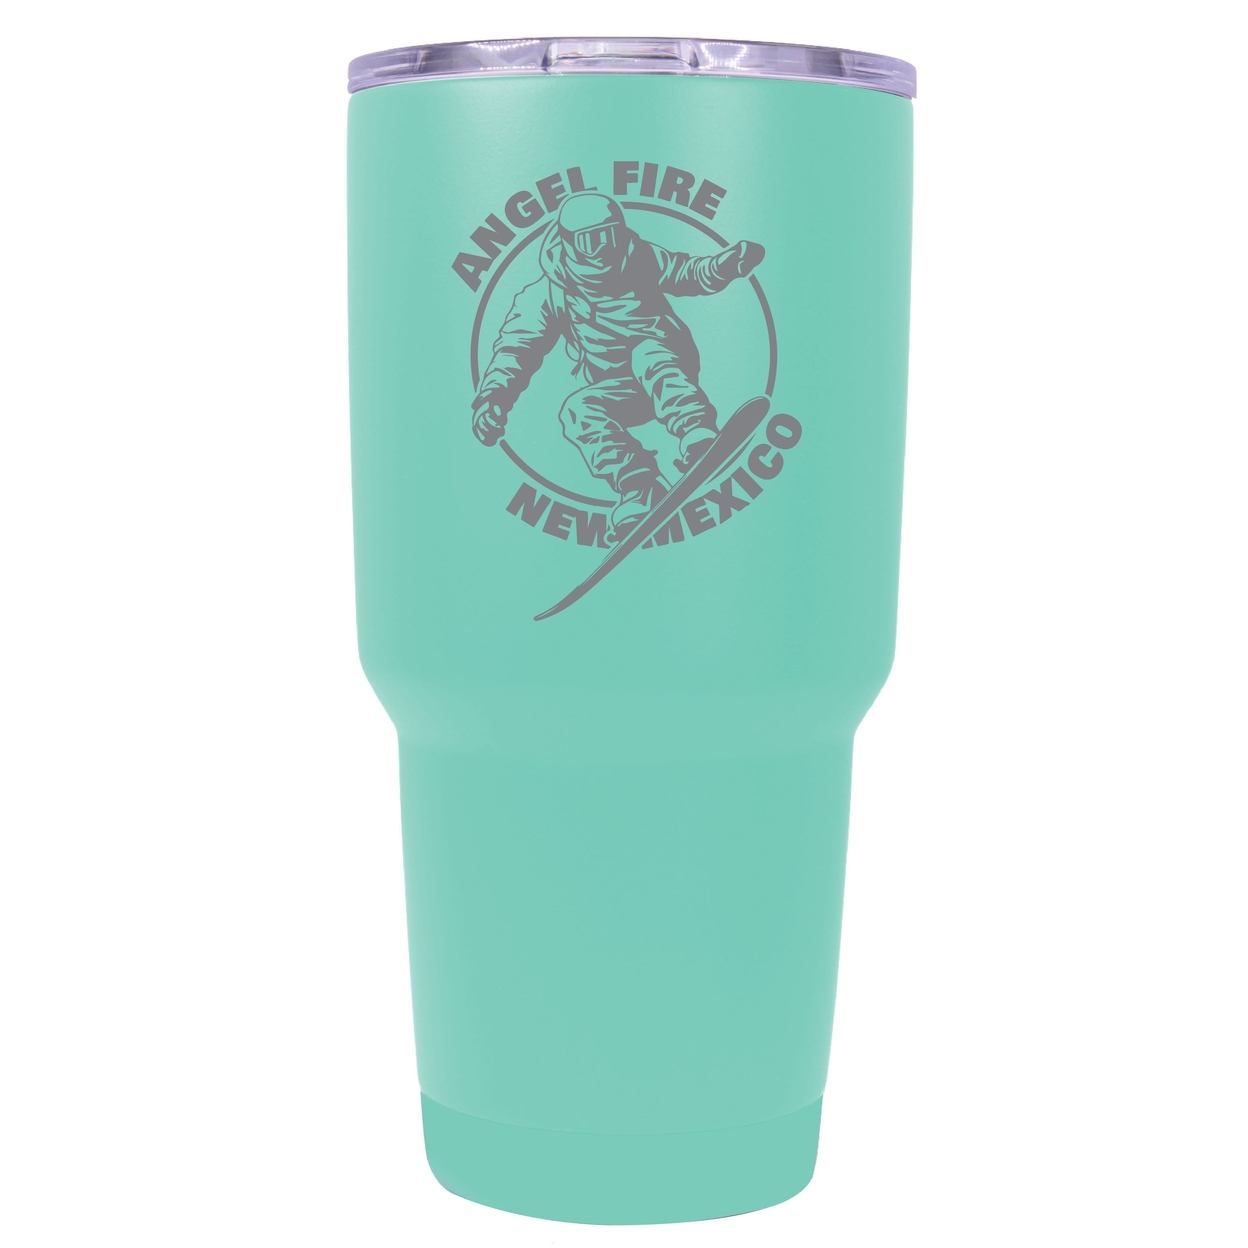 Angel Fire New Mexico Souvenir 24 Oz Engraved Insulated Stainless Steel Tumbler - Seafoam,,2-Pack